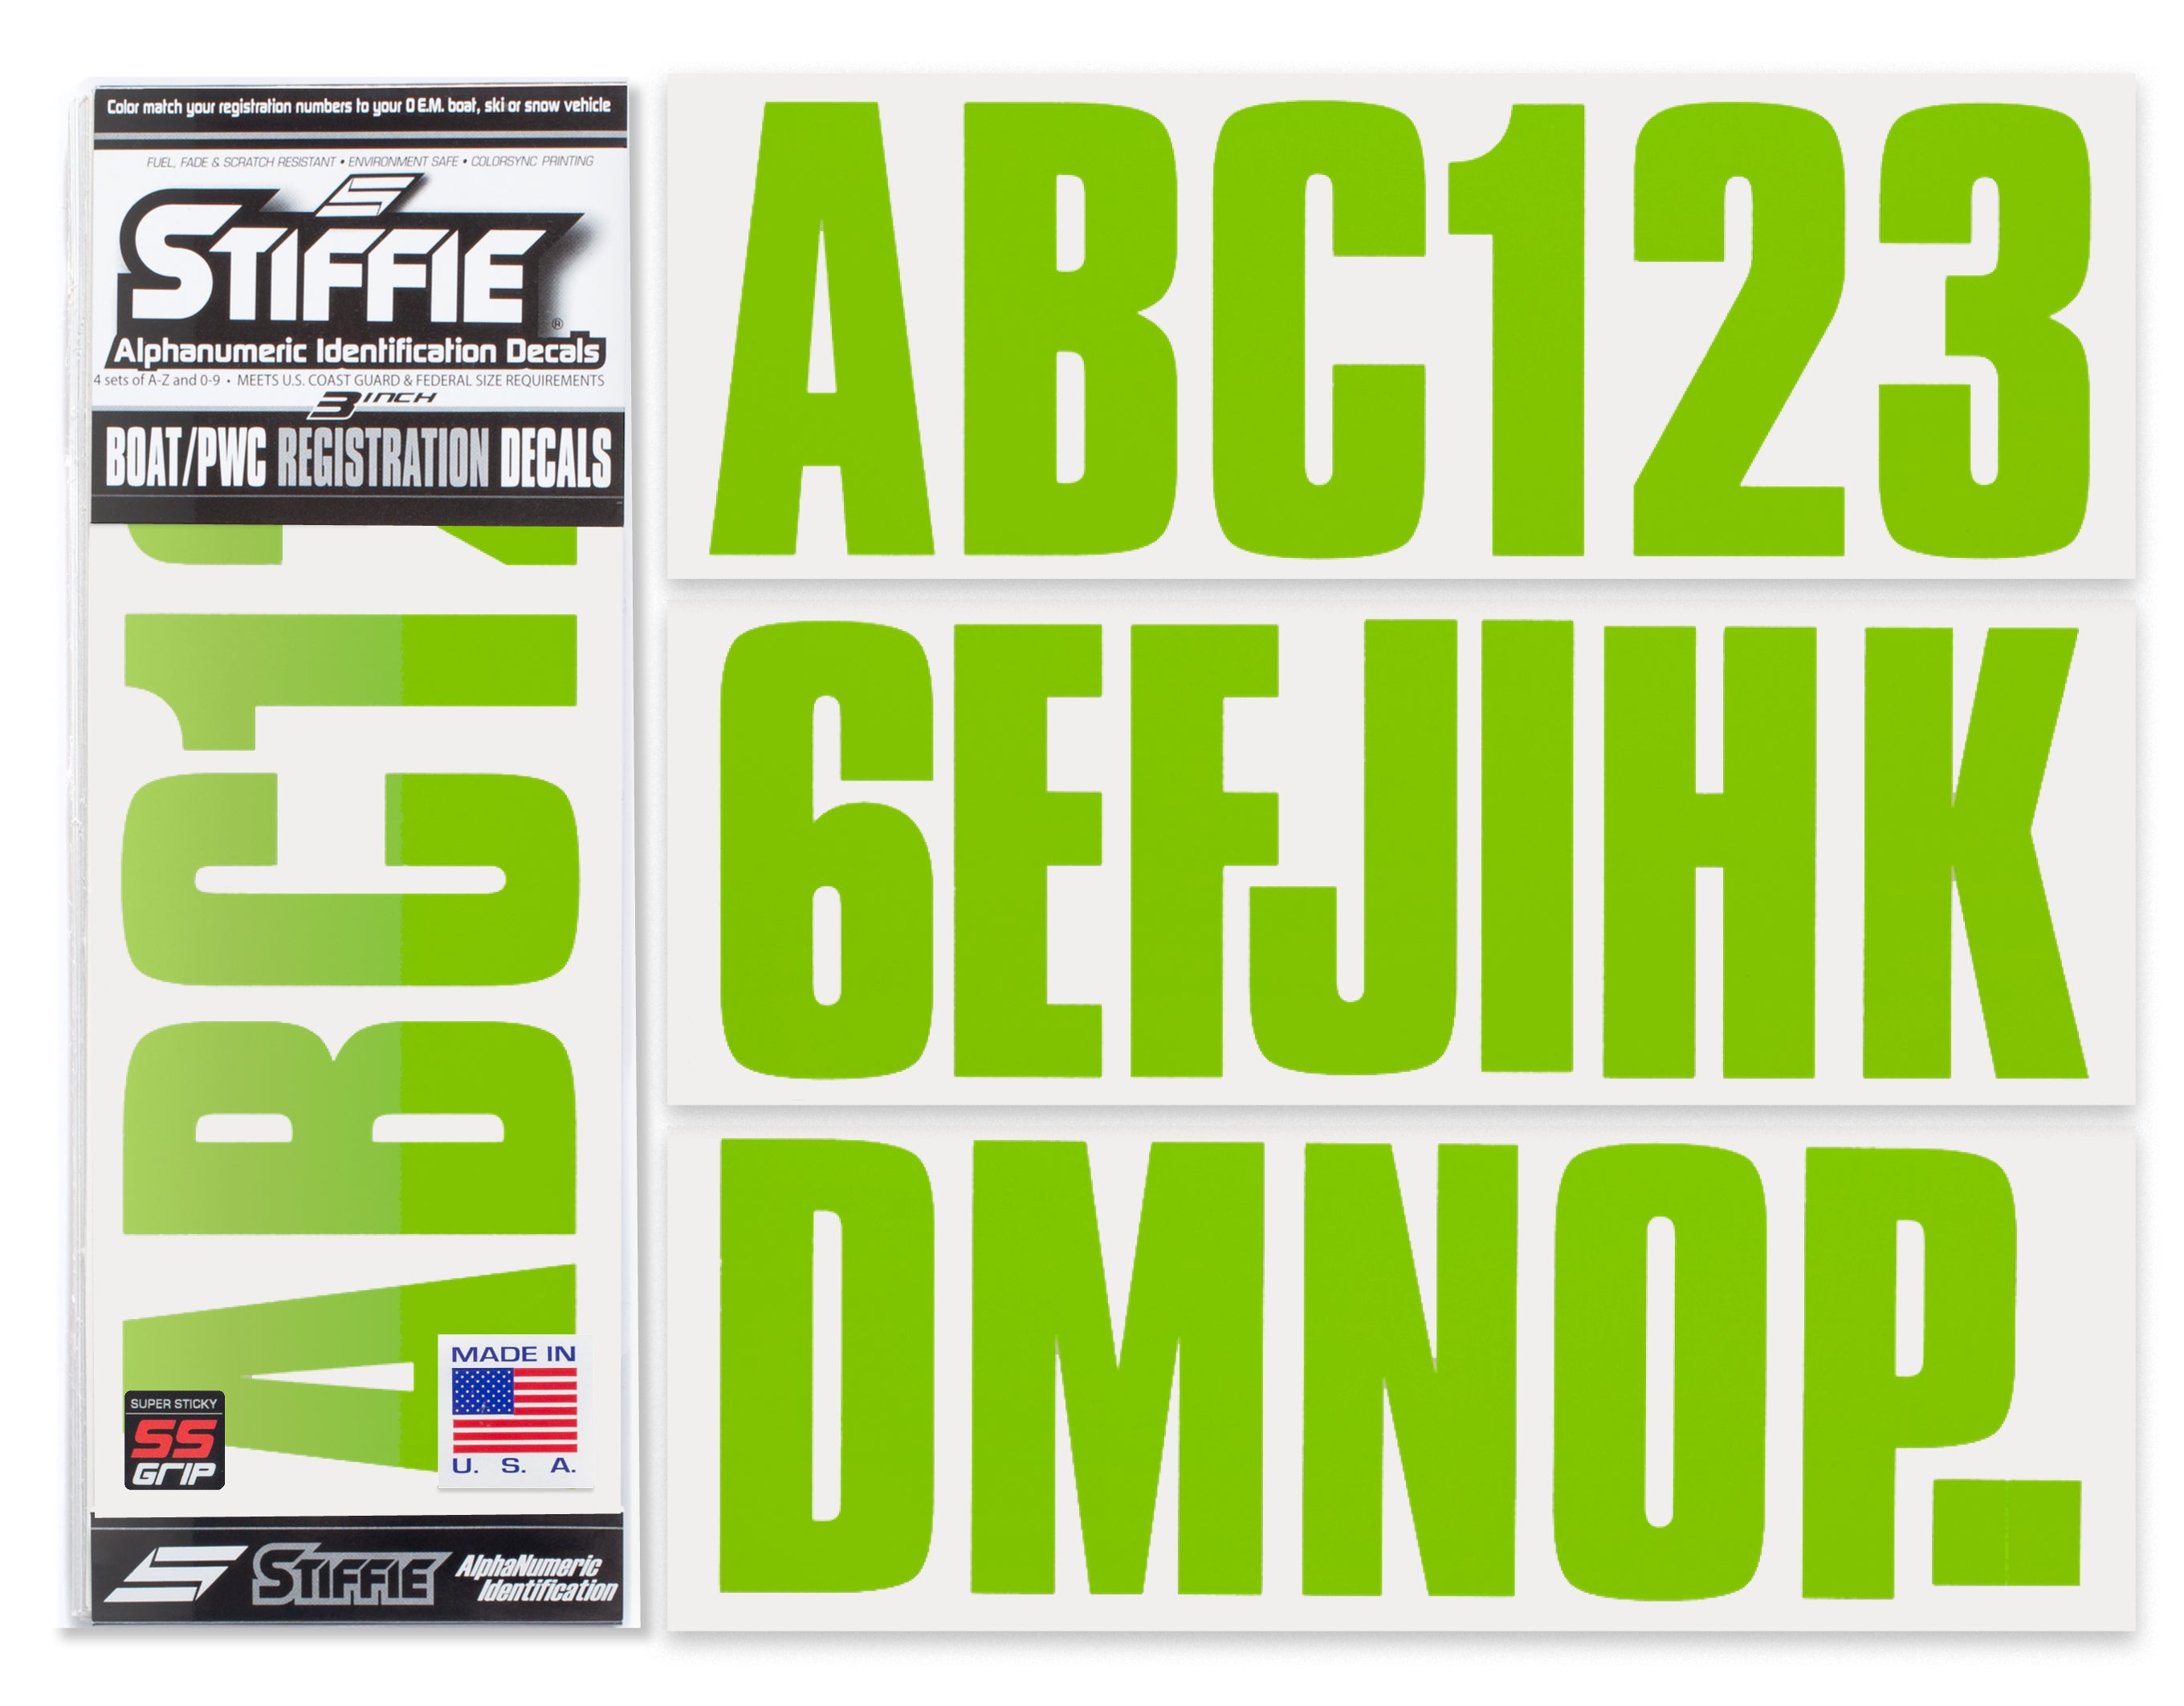 STIFFIE Uniline Team Green Super Sticky 3" Alpha Numeric Registration Identification Numbers Stickers Decals for Sea-Doo Spark, Inflatable Boats, Ribs, Hypalon/PVC, PWC and Boats